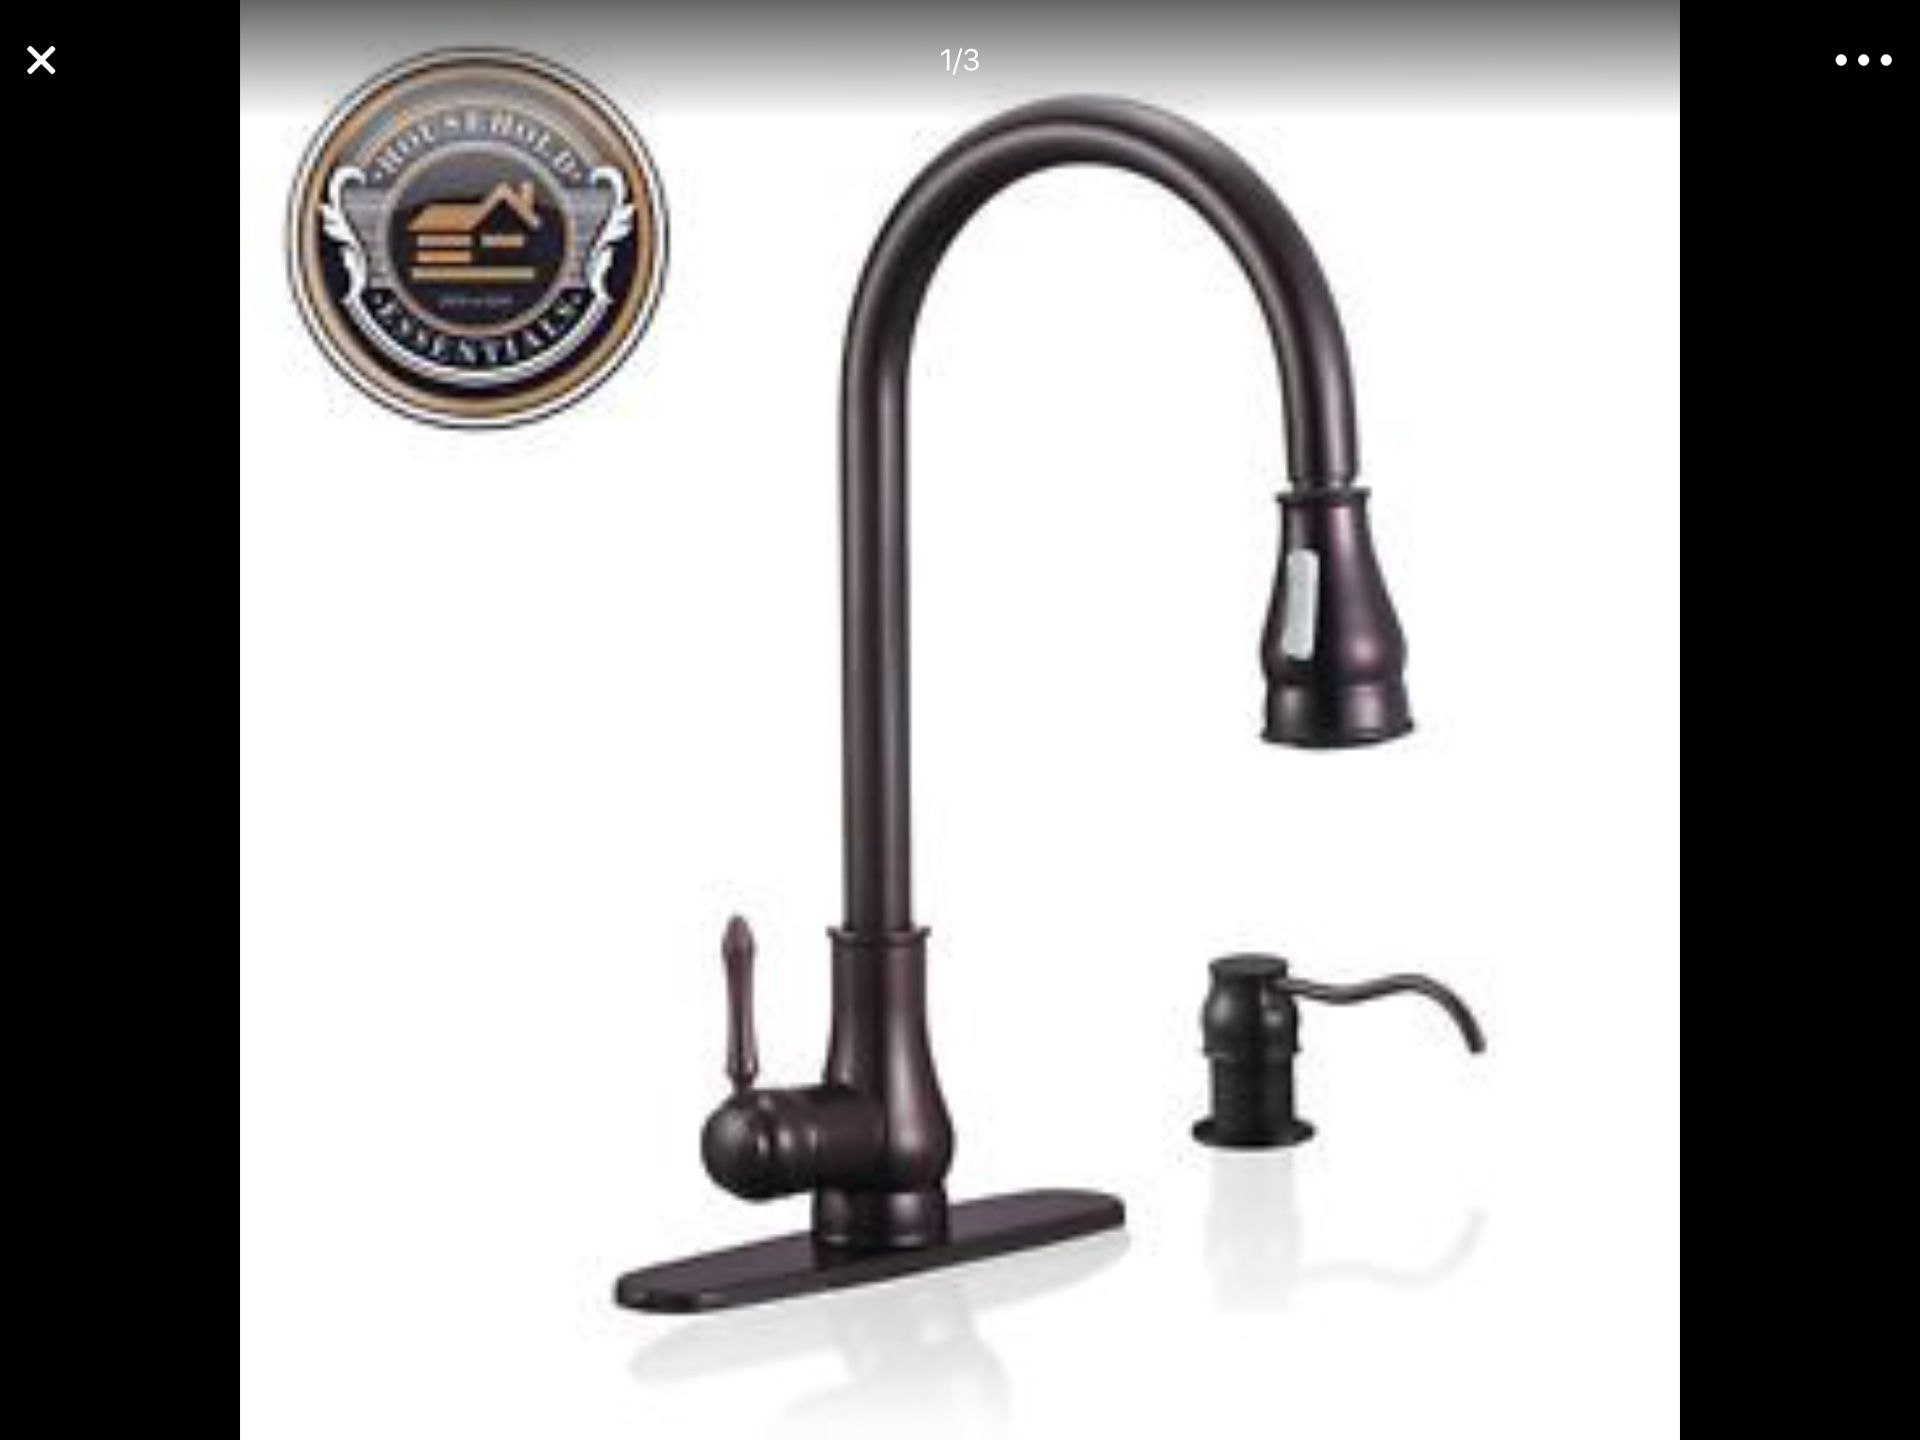 18" Oil Rubbed Bronze Pull Down Kitchen Sink Faucet w/ Soap Dispenser..... CHECK OUT MY PAGE FOR MORE ITEMS